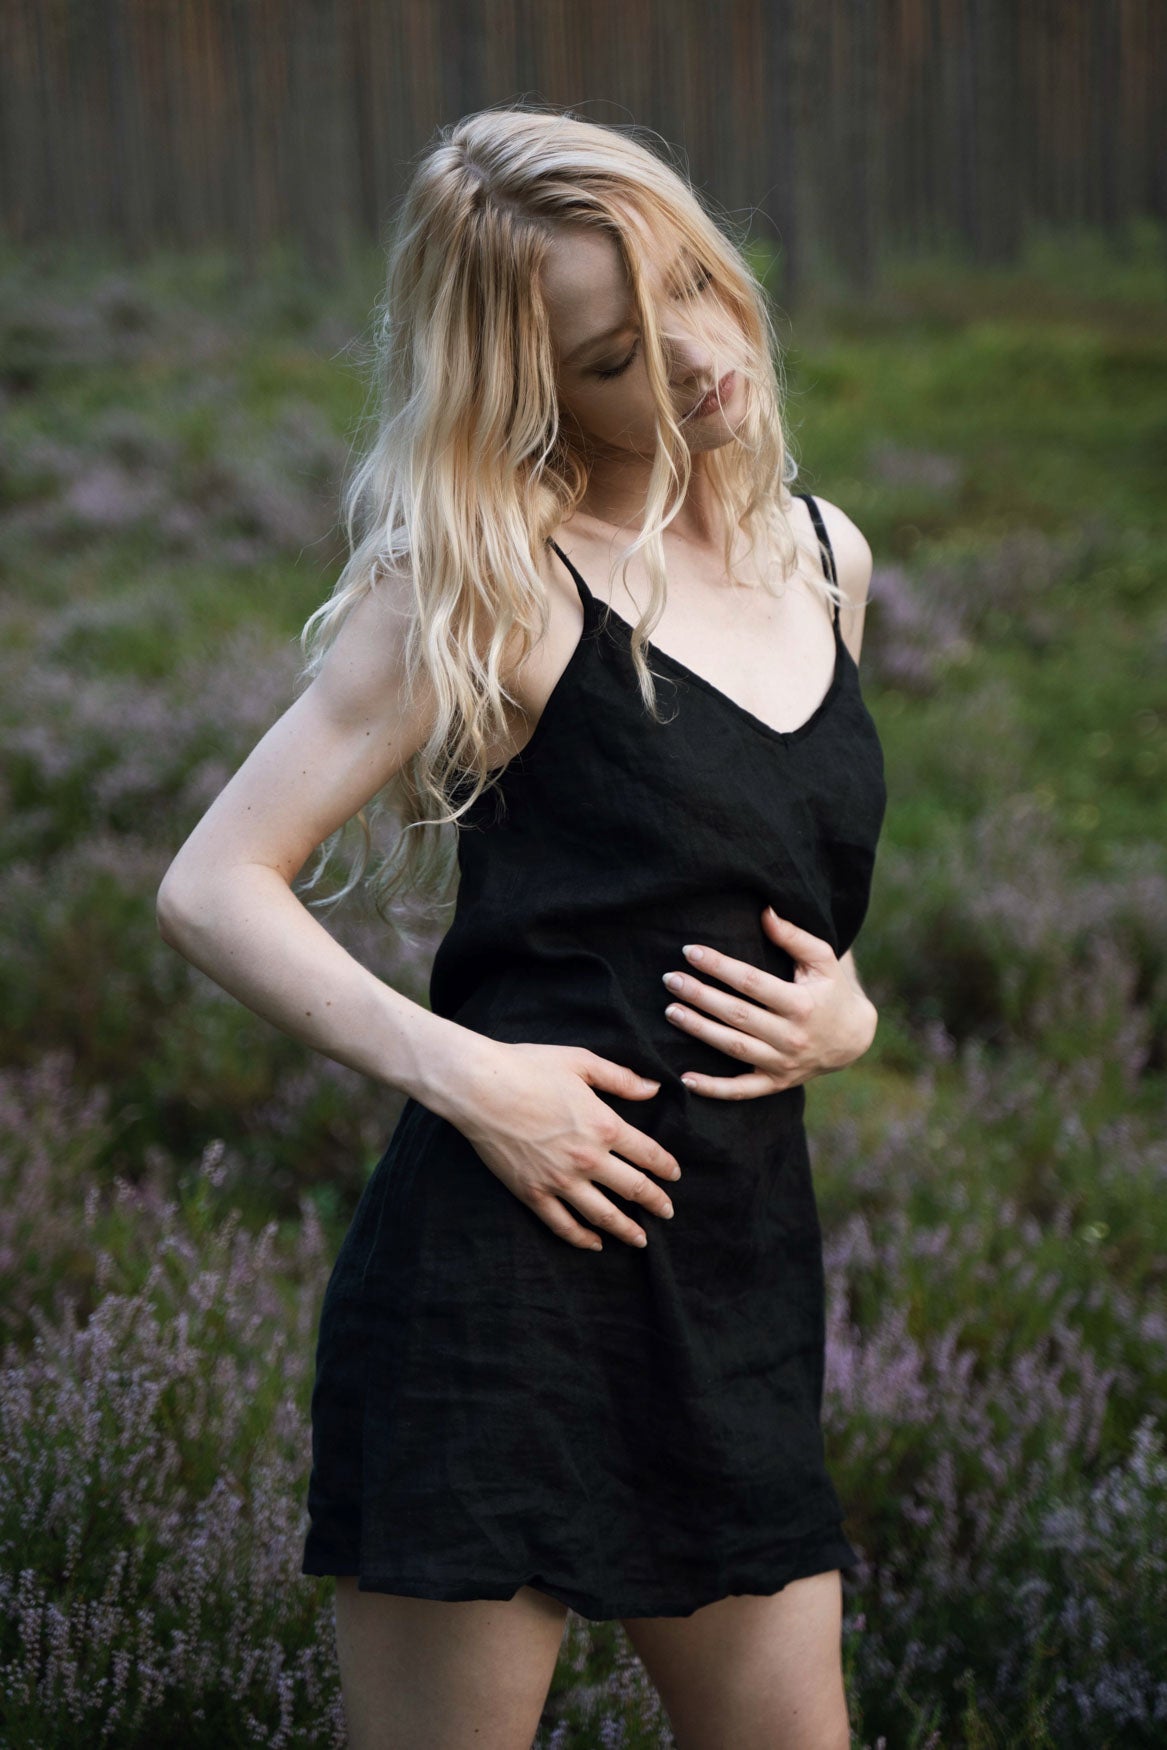 Organic, sustainable and sexy at the same time! Agasåga black short natural linen slip dress, nightdress with straps. This sleepwear is natural, soft, breathable and pure. It’s a conscious and healthy choice for your body and environment that embraces genuine selflove and selfcare. Handmade with love in the North.